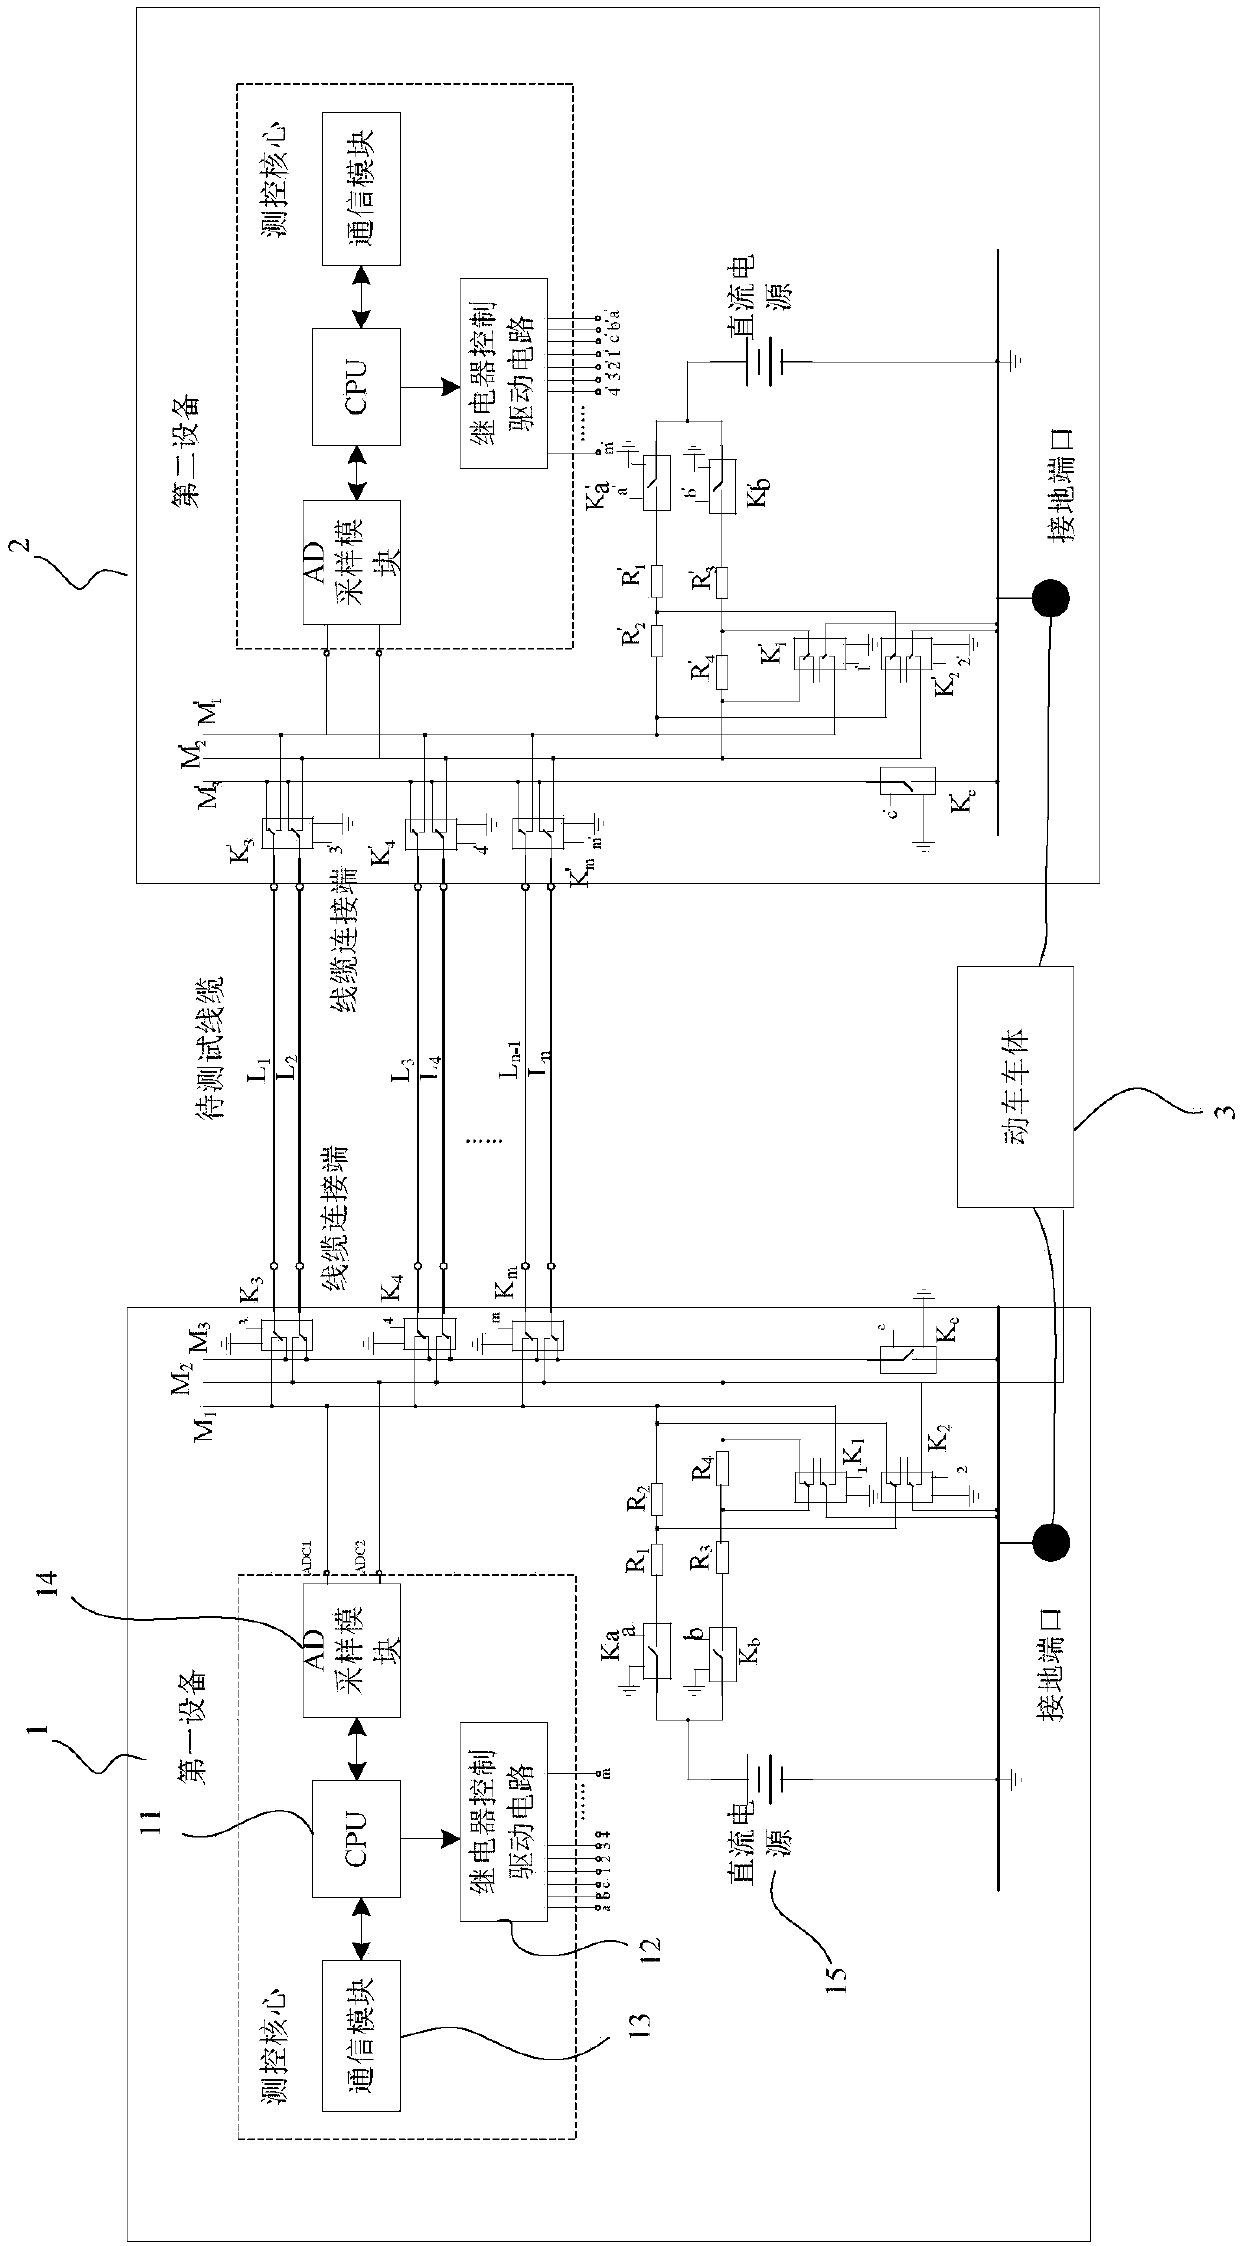 Hand-held cable continuity test device and system and test method for rail vehicle